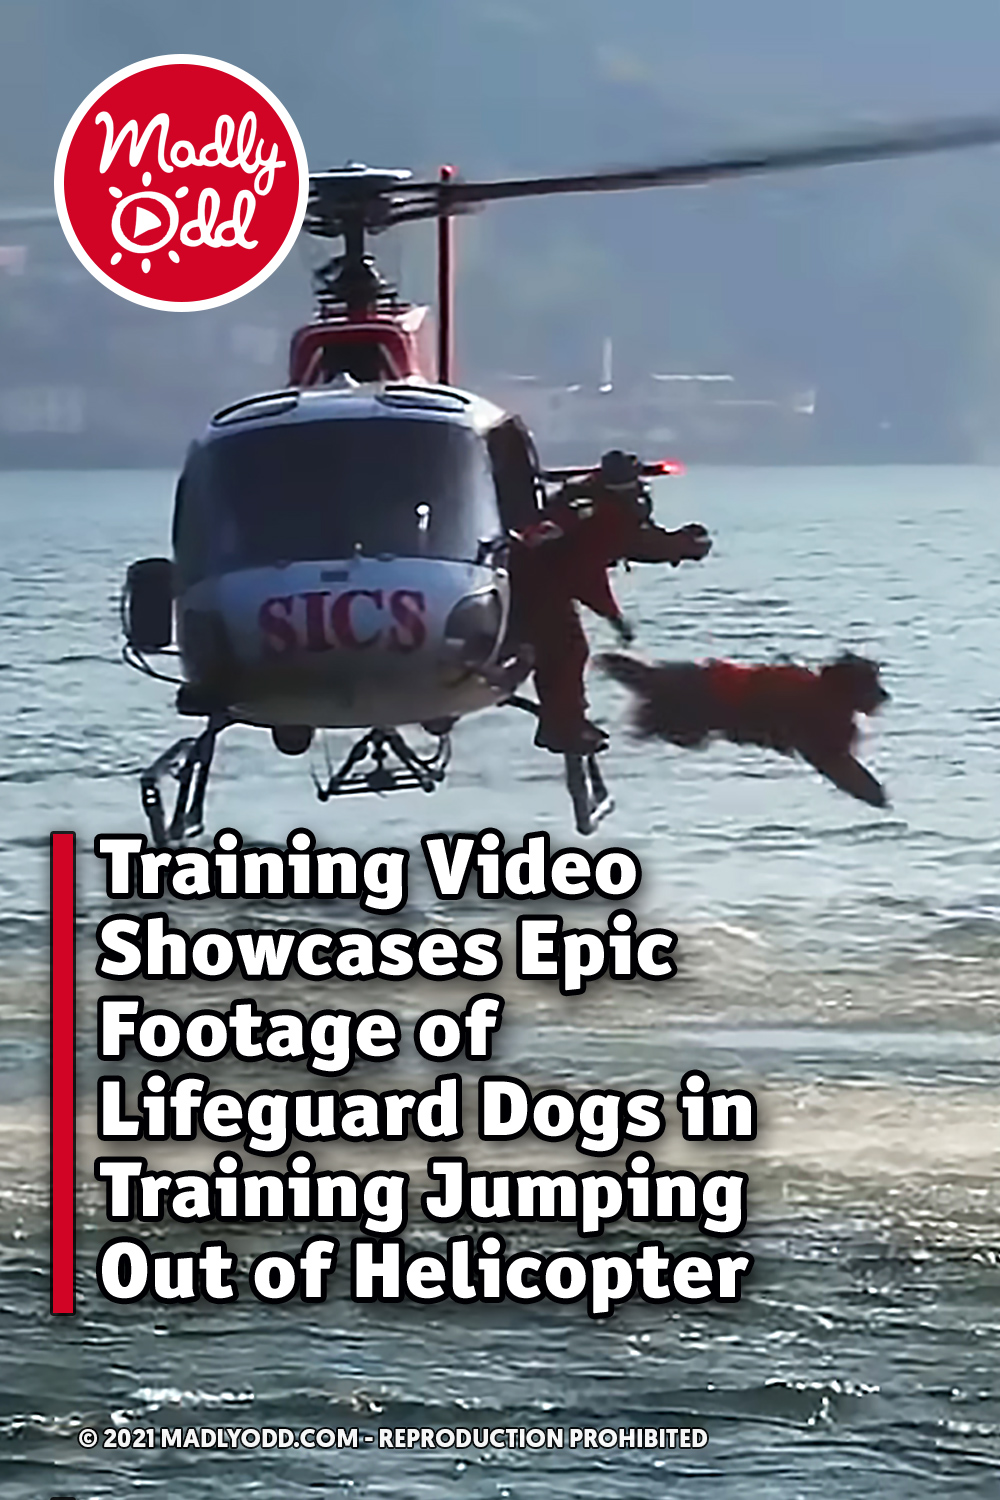 Training Video Showcases Epic Footage of Lifeguard Dogs in Training Jumping Out of Helicopter